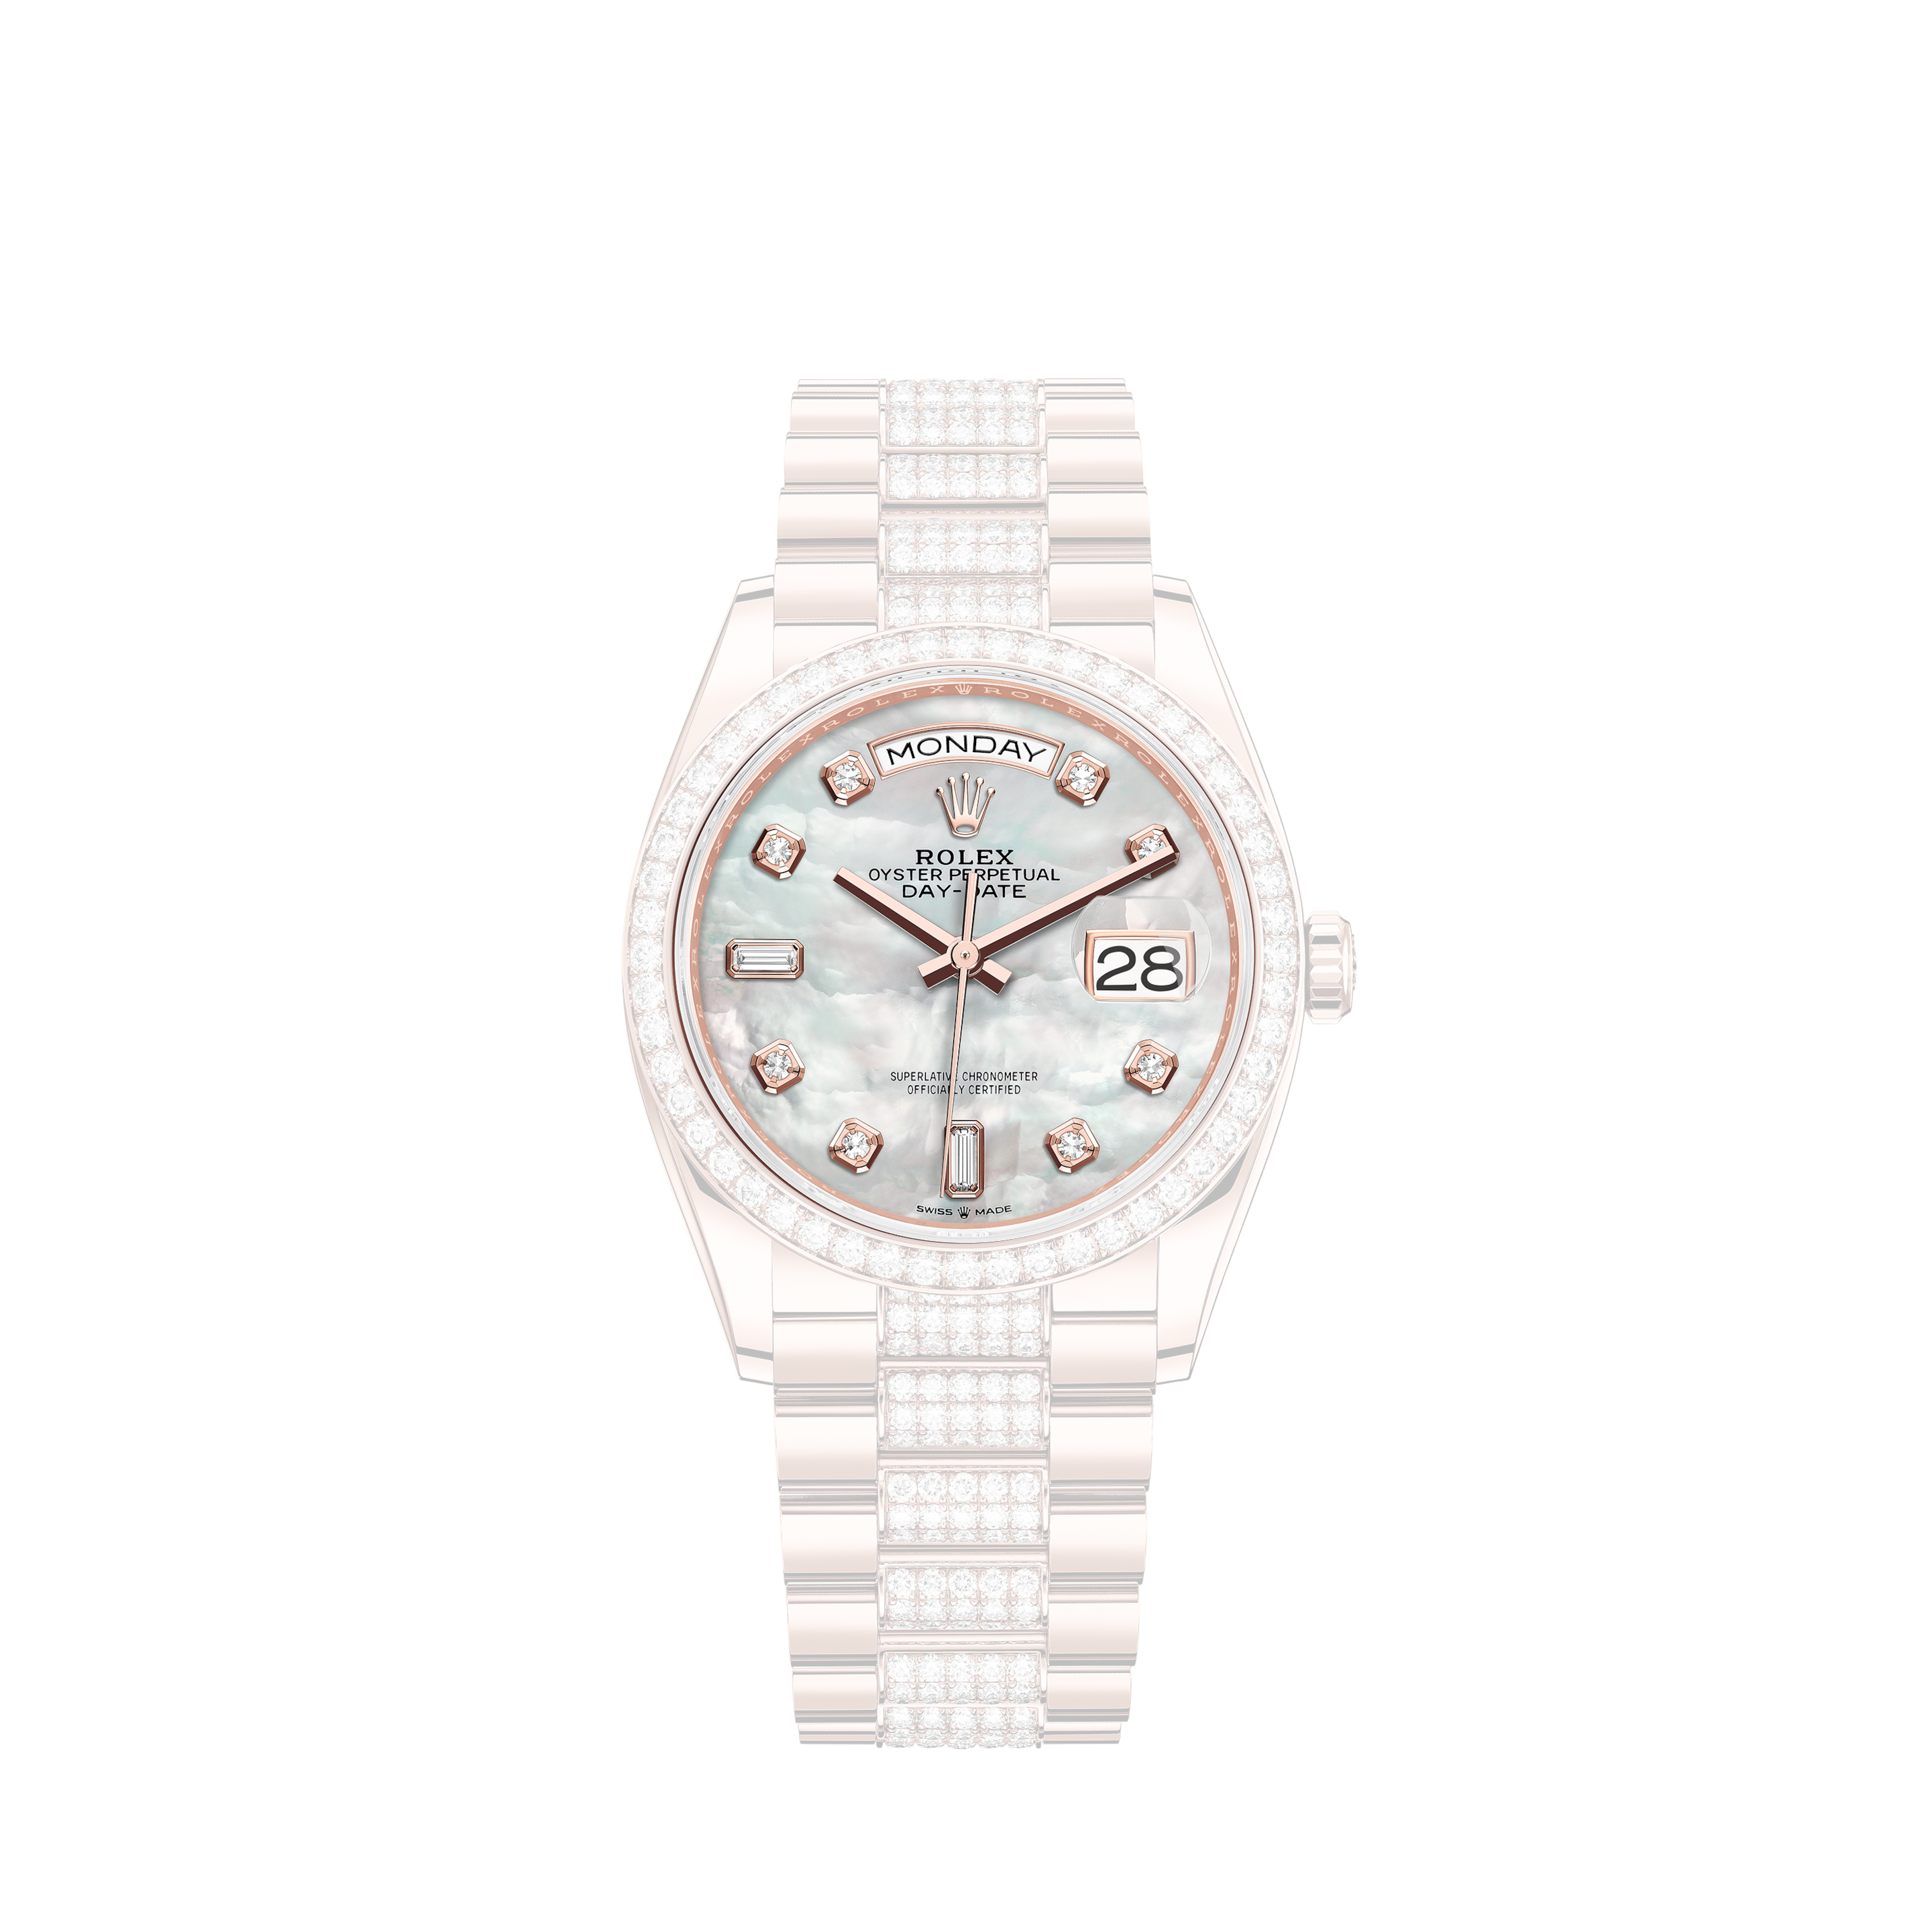 Rolex Ivory Baguette Track 36 Datejust Two Tone 18K Gold + SS + Side Diamonds Oyster Band + BezelRolex Ivory Baguette Track 36mm Datejust Two Tone Side Diamonds + Rubies